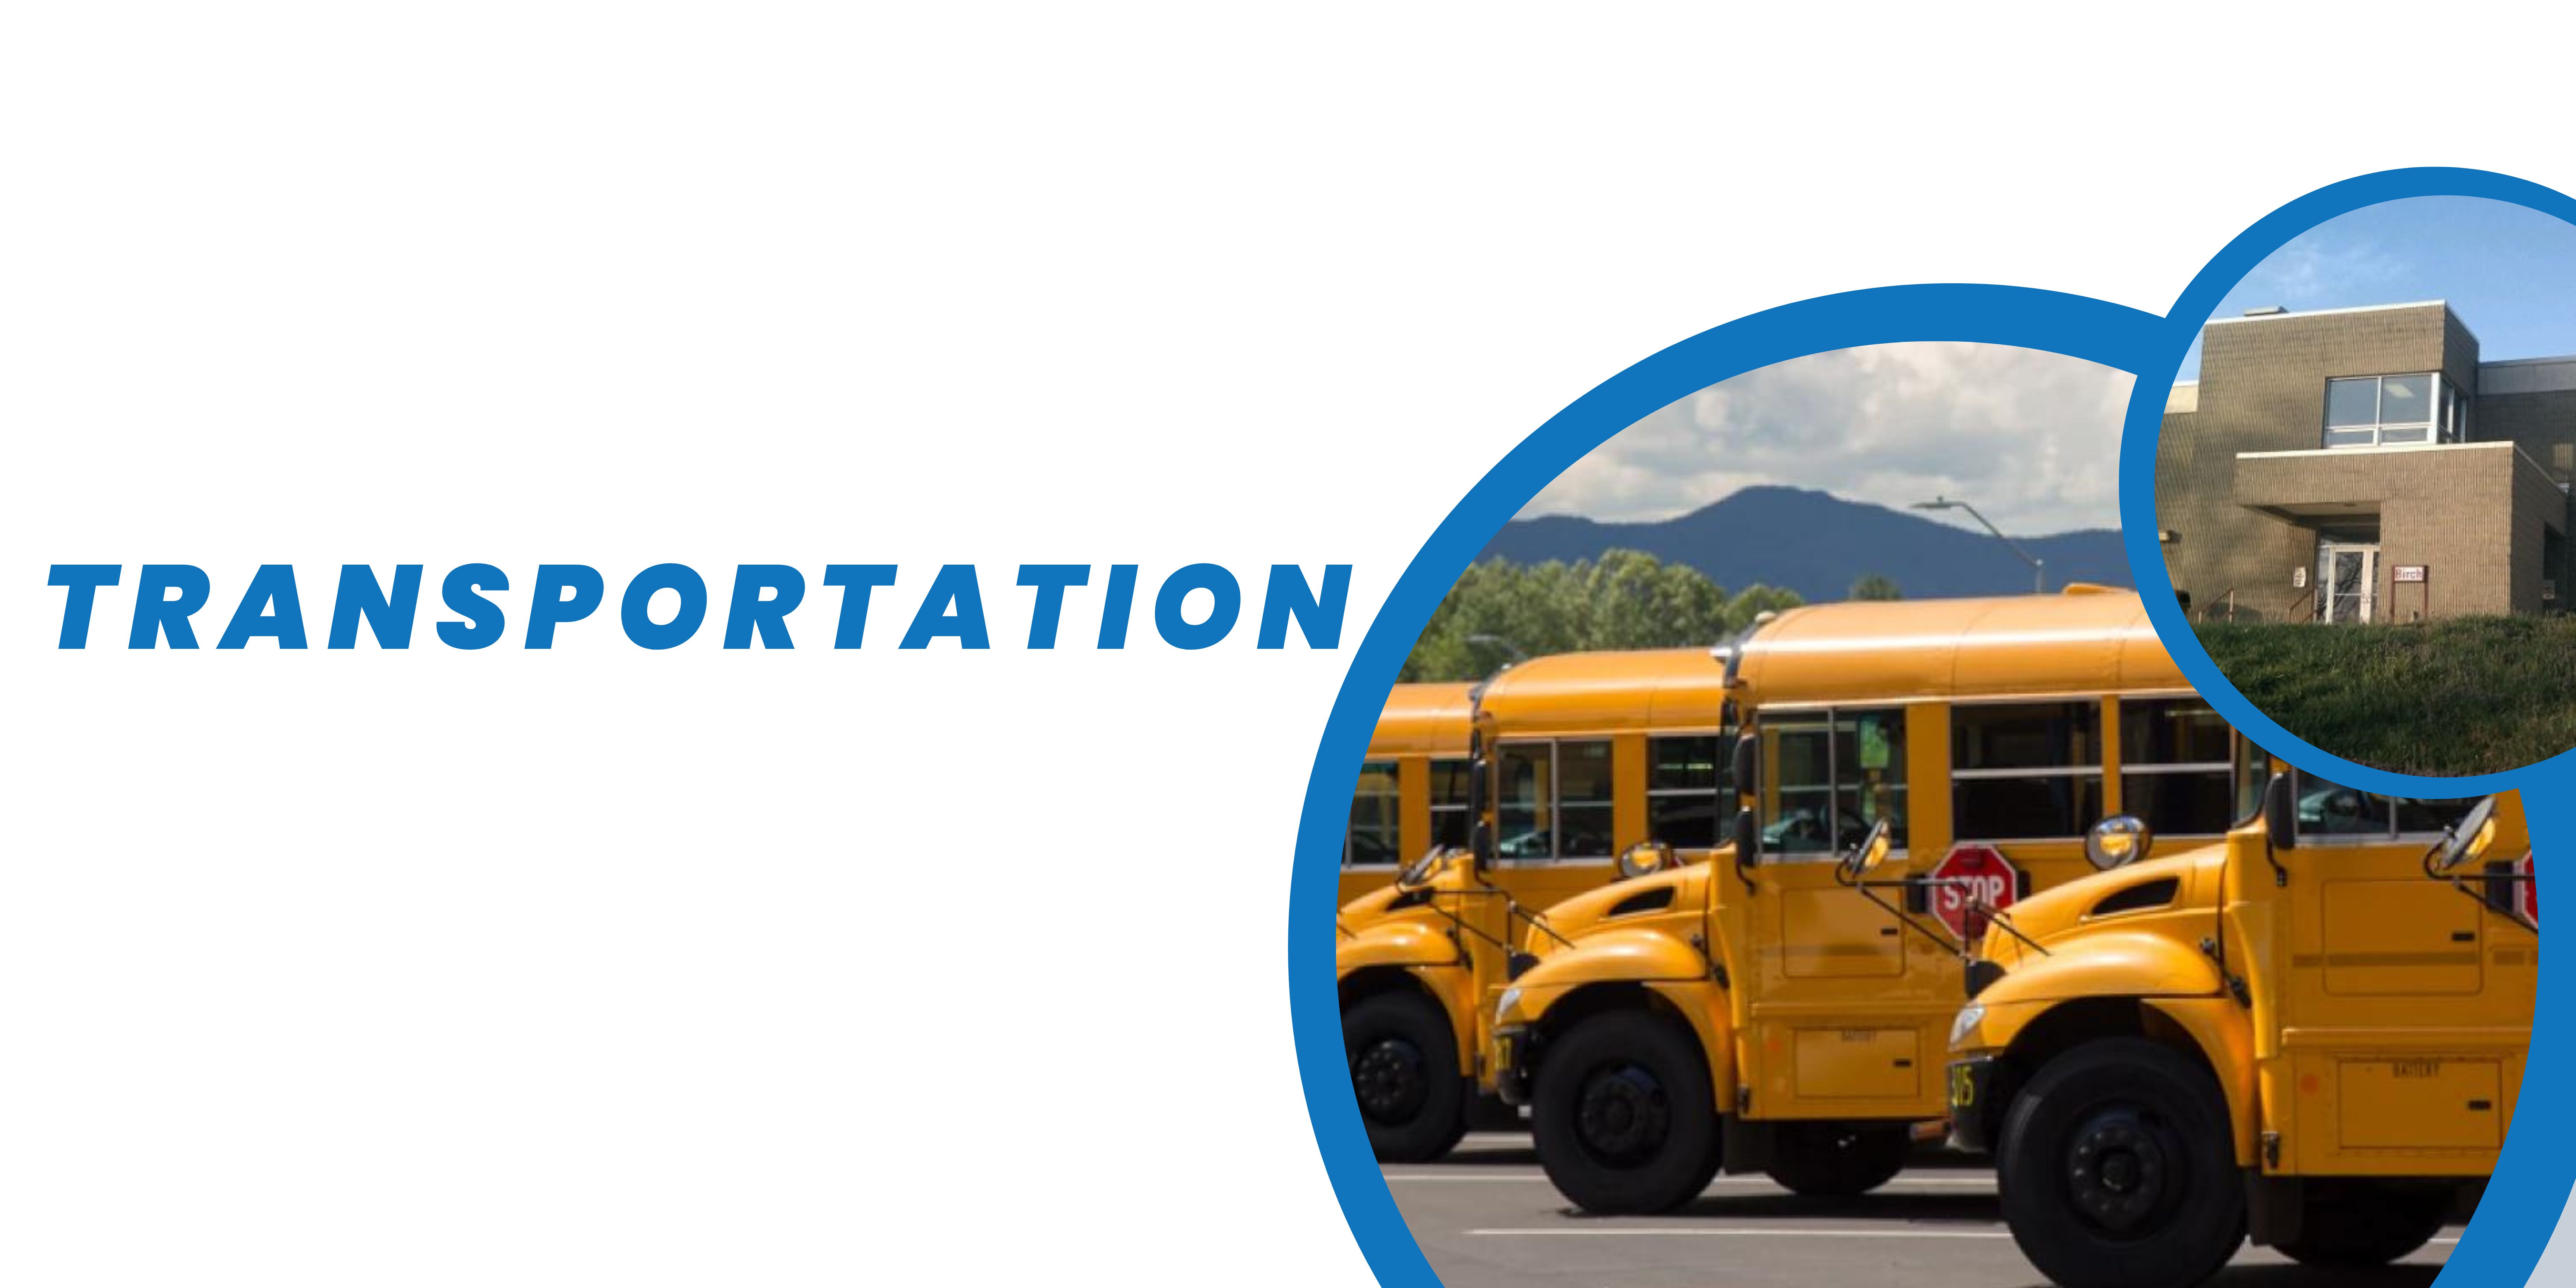 transportation and picture of buses